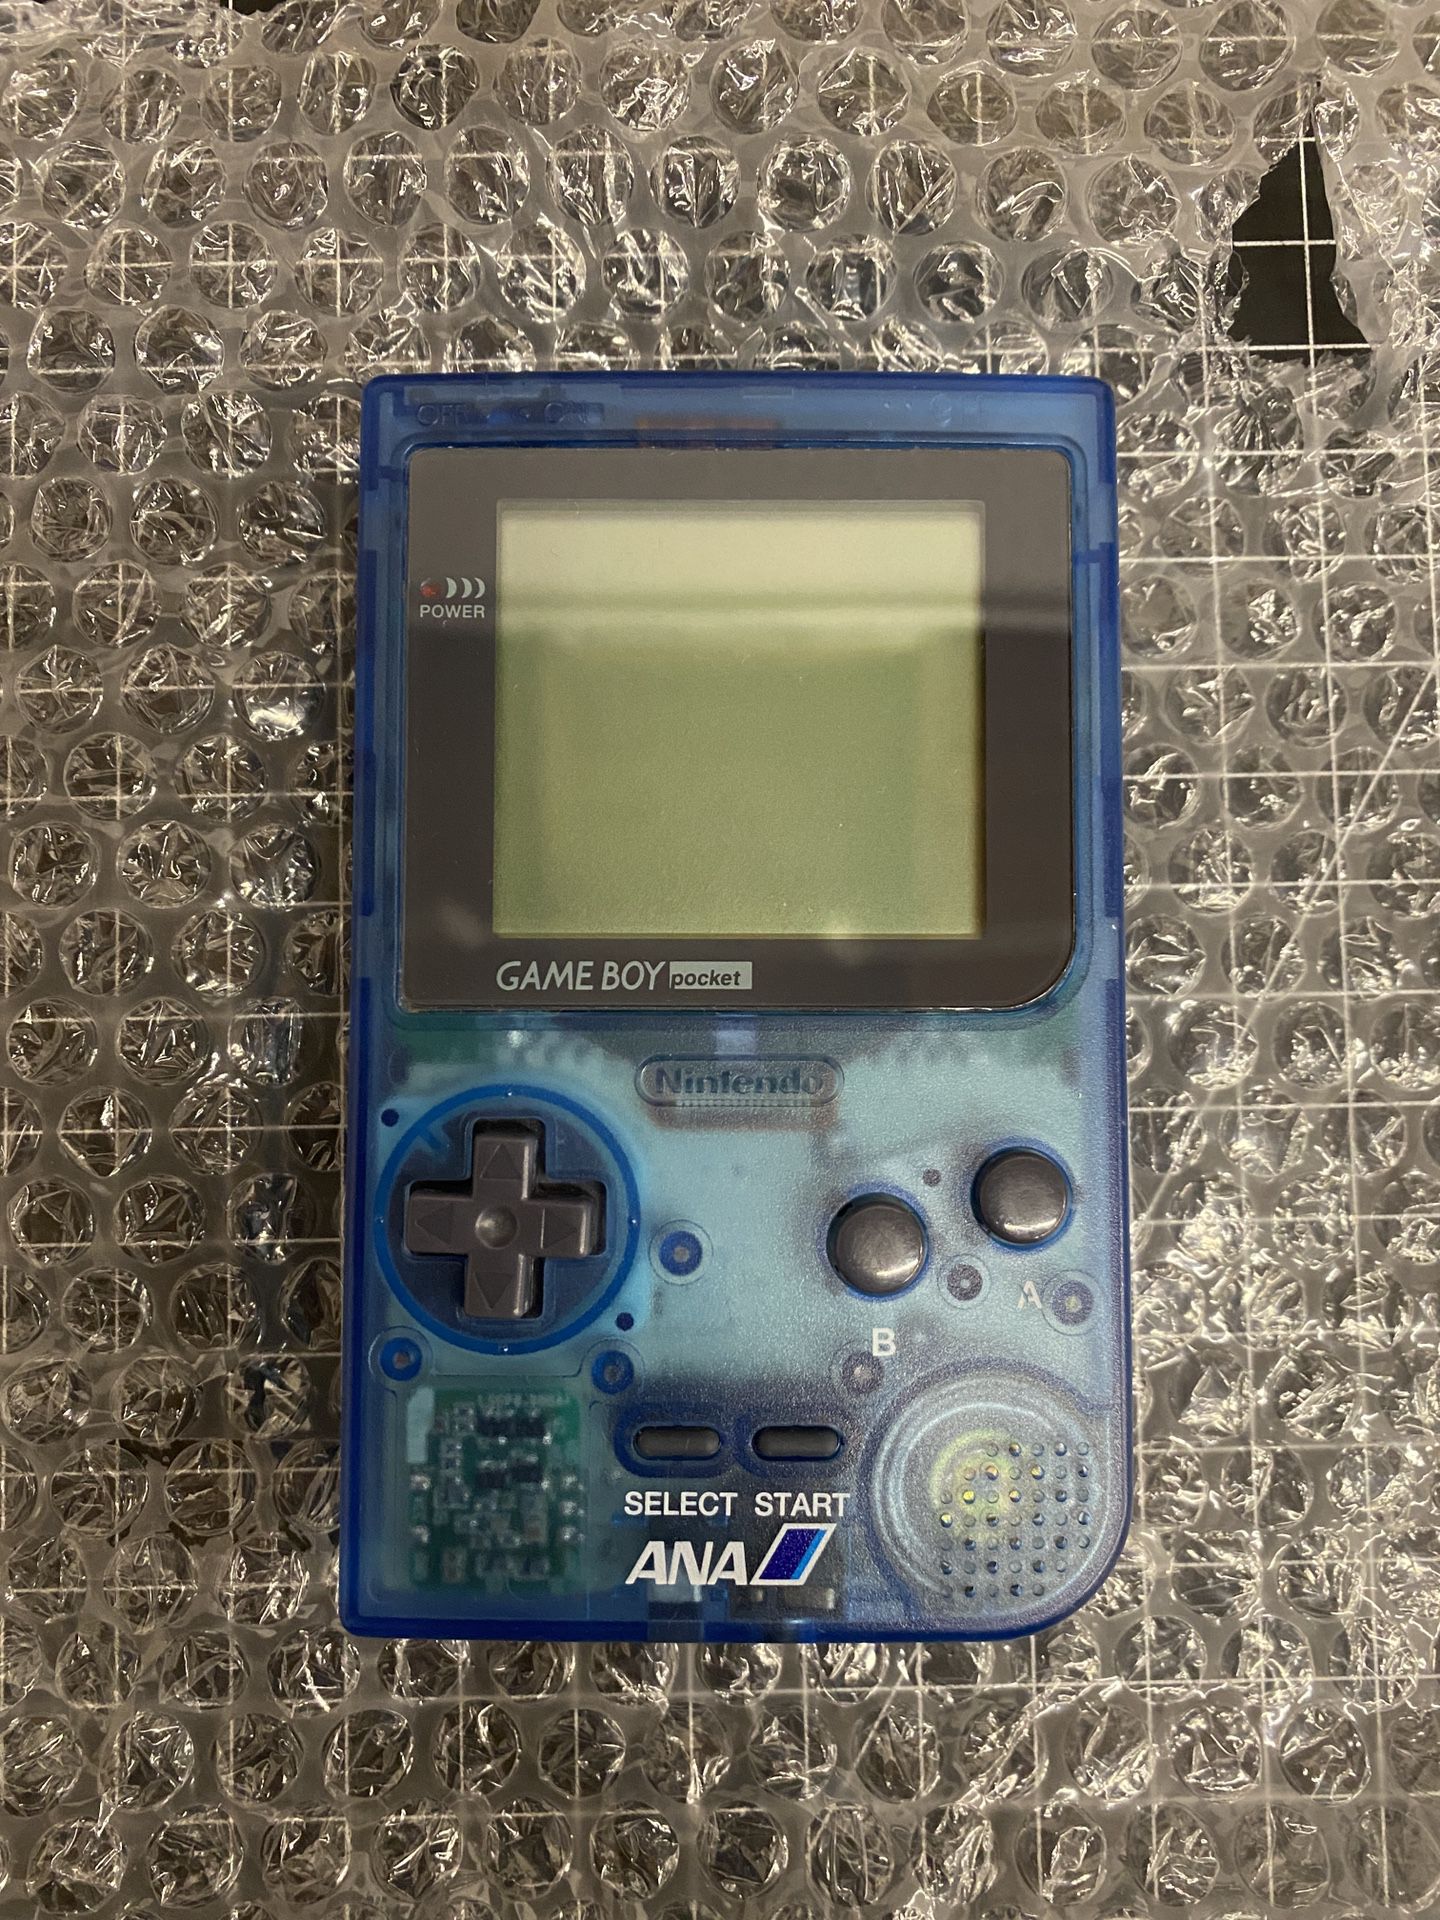 Extremely Rare Gameboy Pocket ANA Airlines Limited Edition Good Condition